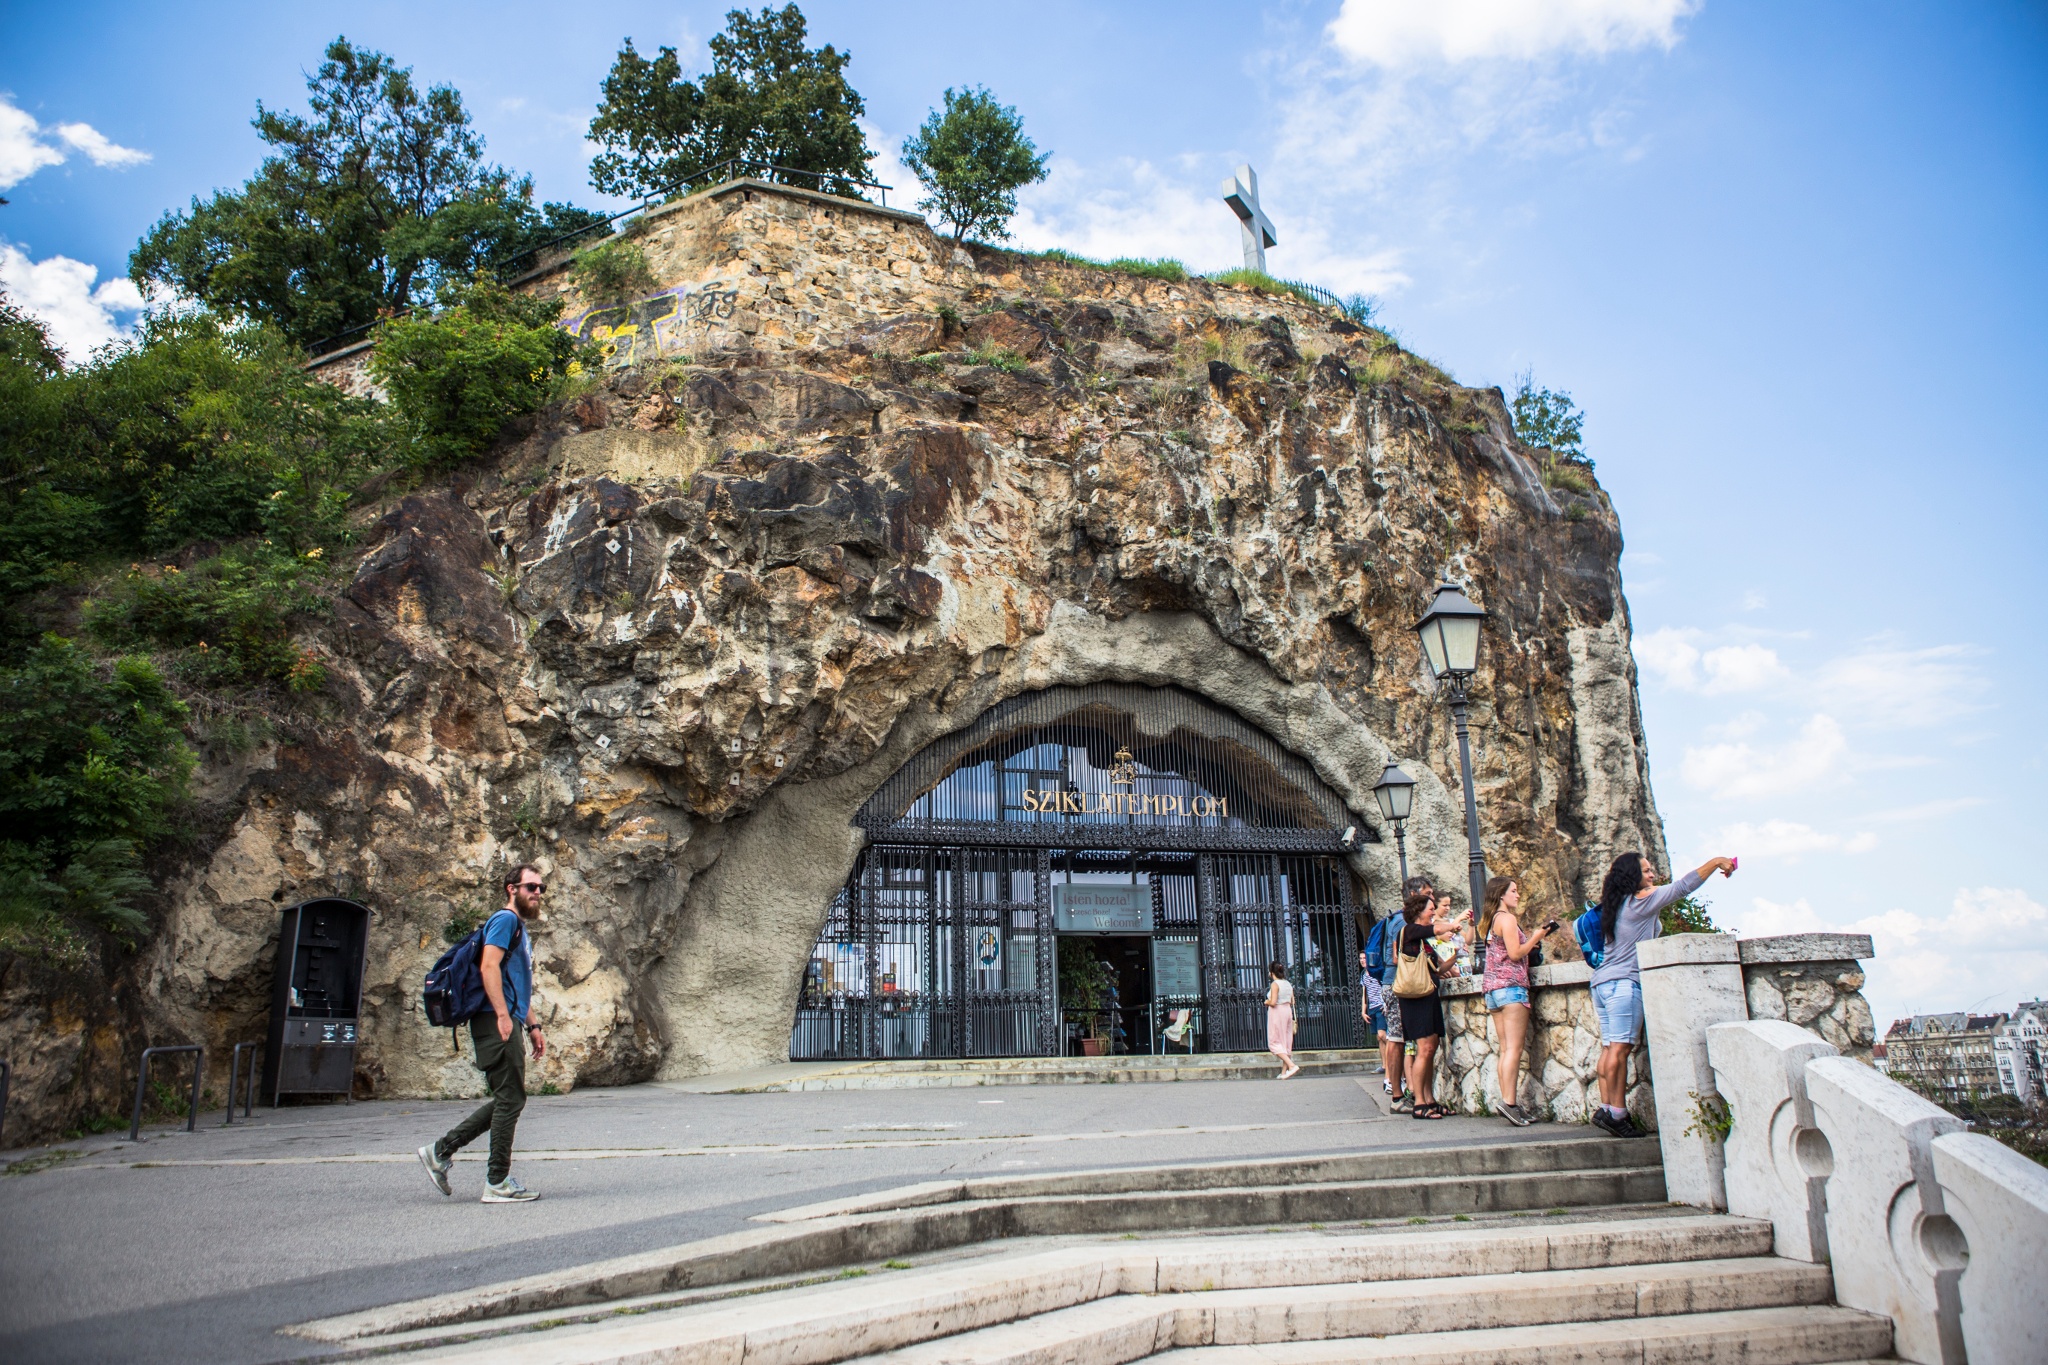 St. Ivan’s cave, the mysterious cave church within Gellért Hill